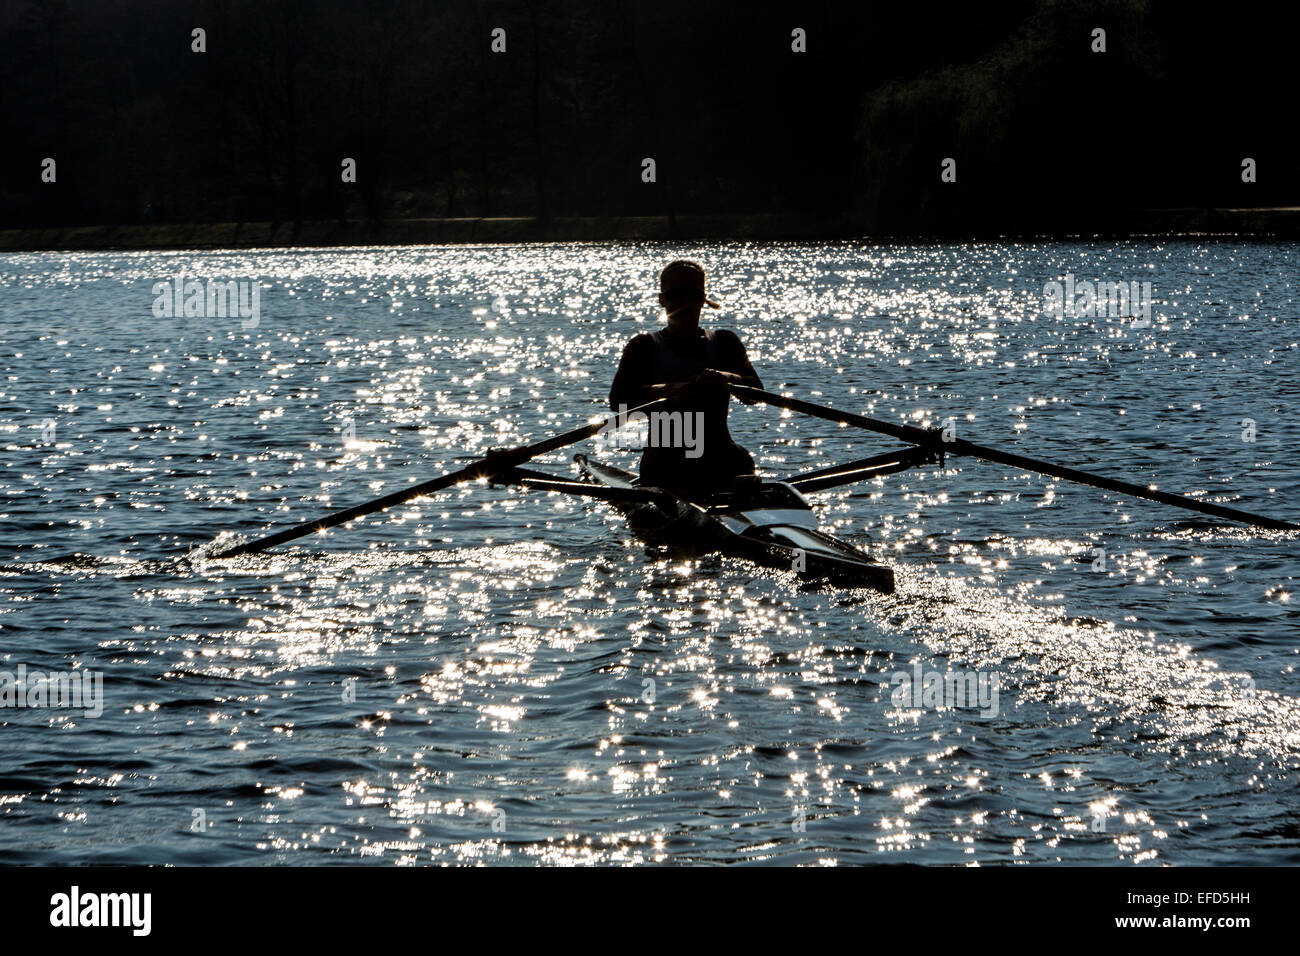 Water sports, at the Essen Baldeneysee, rowing training, Stock Photo